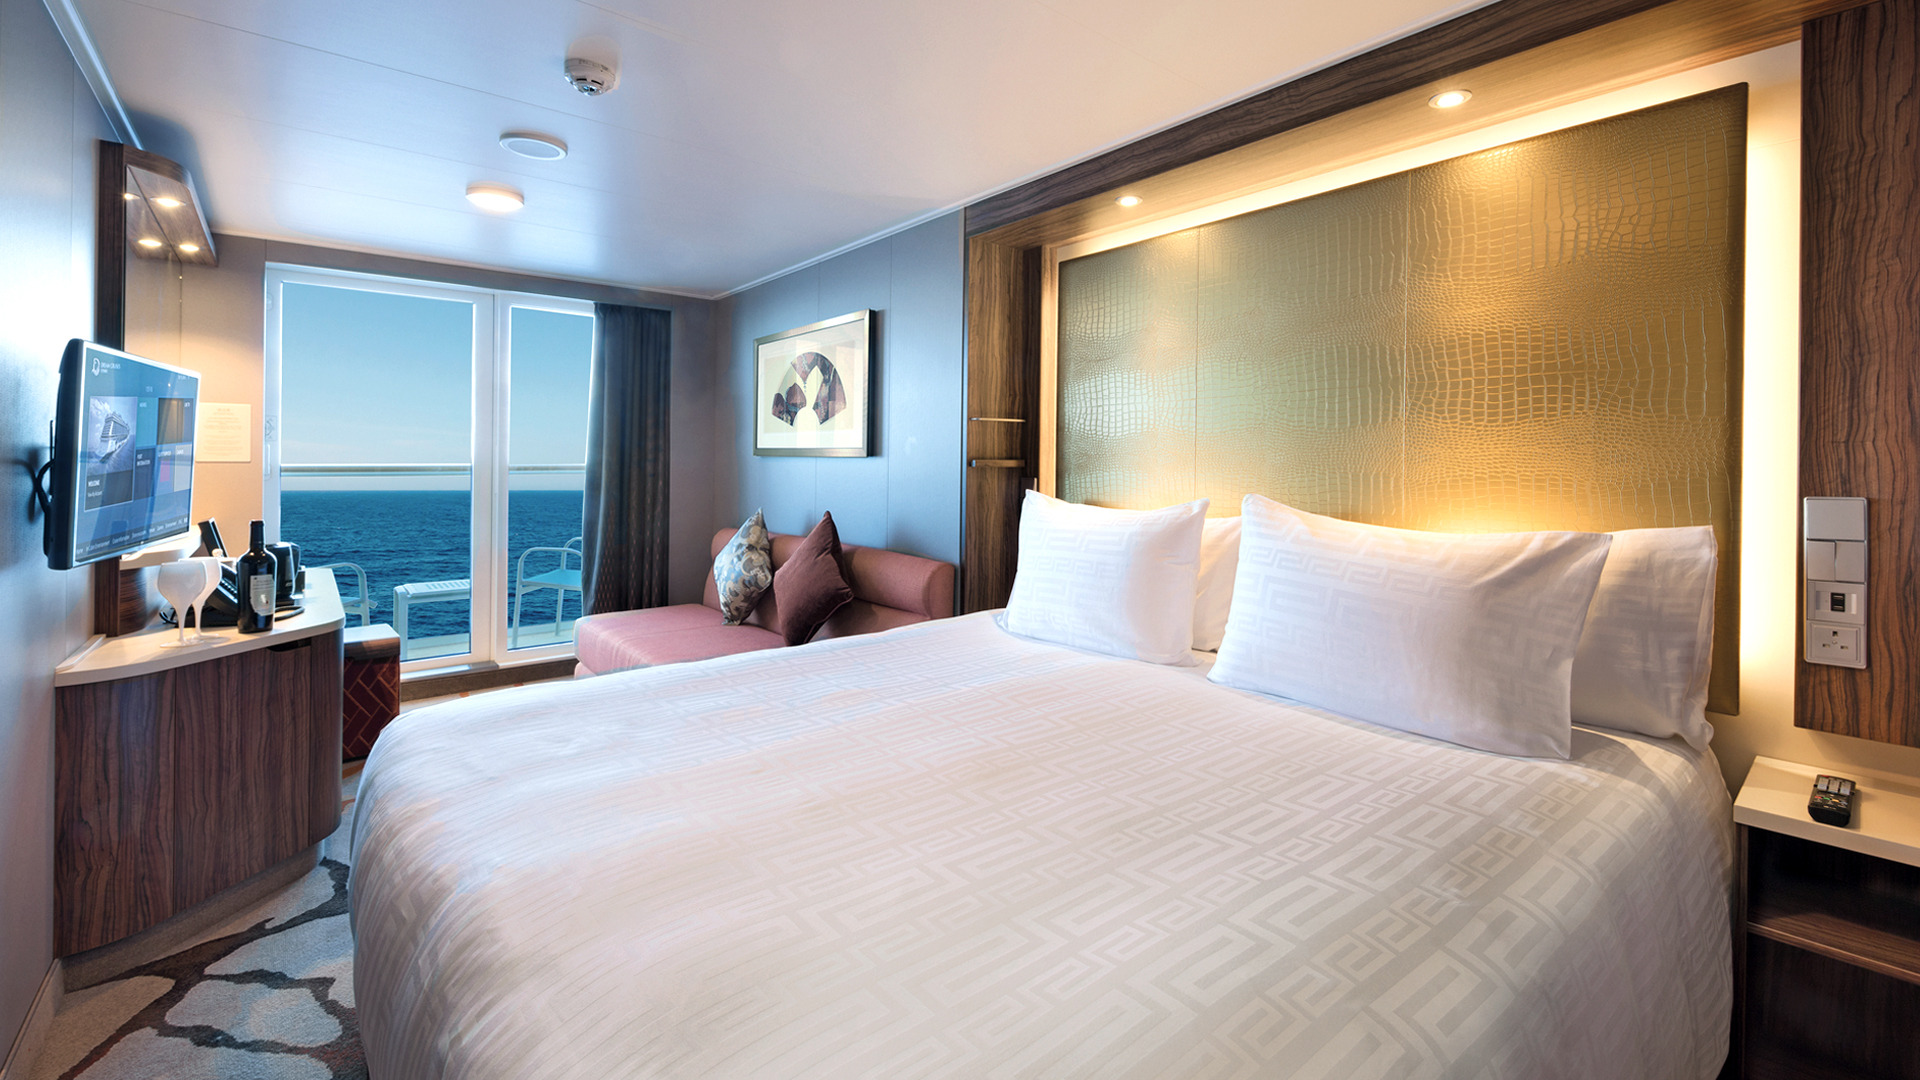 Genting Dream’s Balcony Deluxe Stateroom with amazing Oceanview lounge